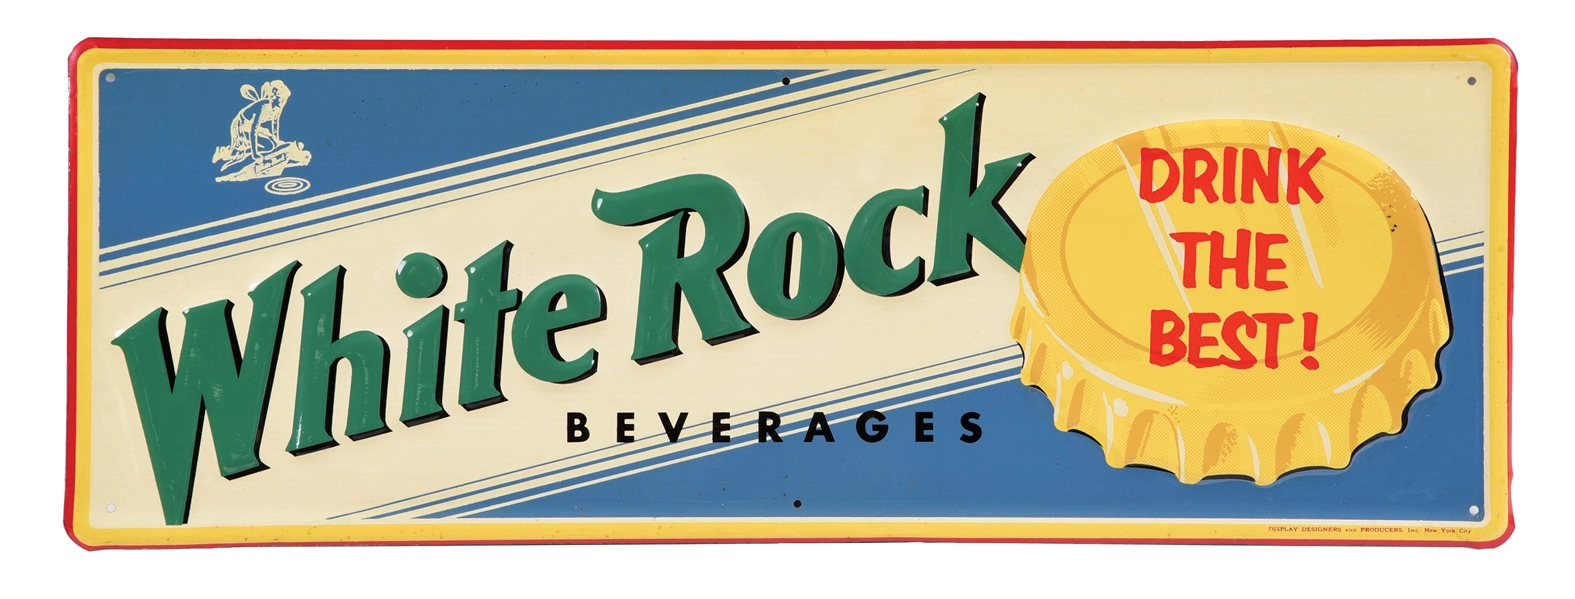 WHITE ROCK BEVERAGES SELF-FRAMED EMBOSSED TIN SIGN W/ FAIRY GRAPHIC.